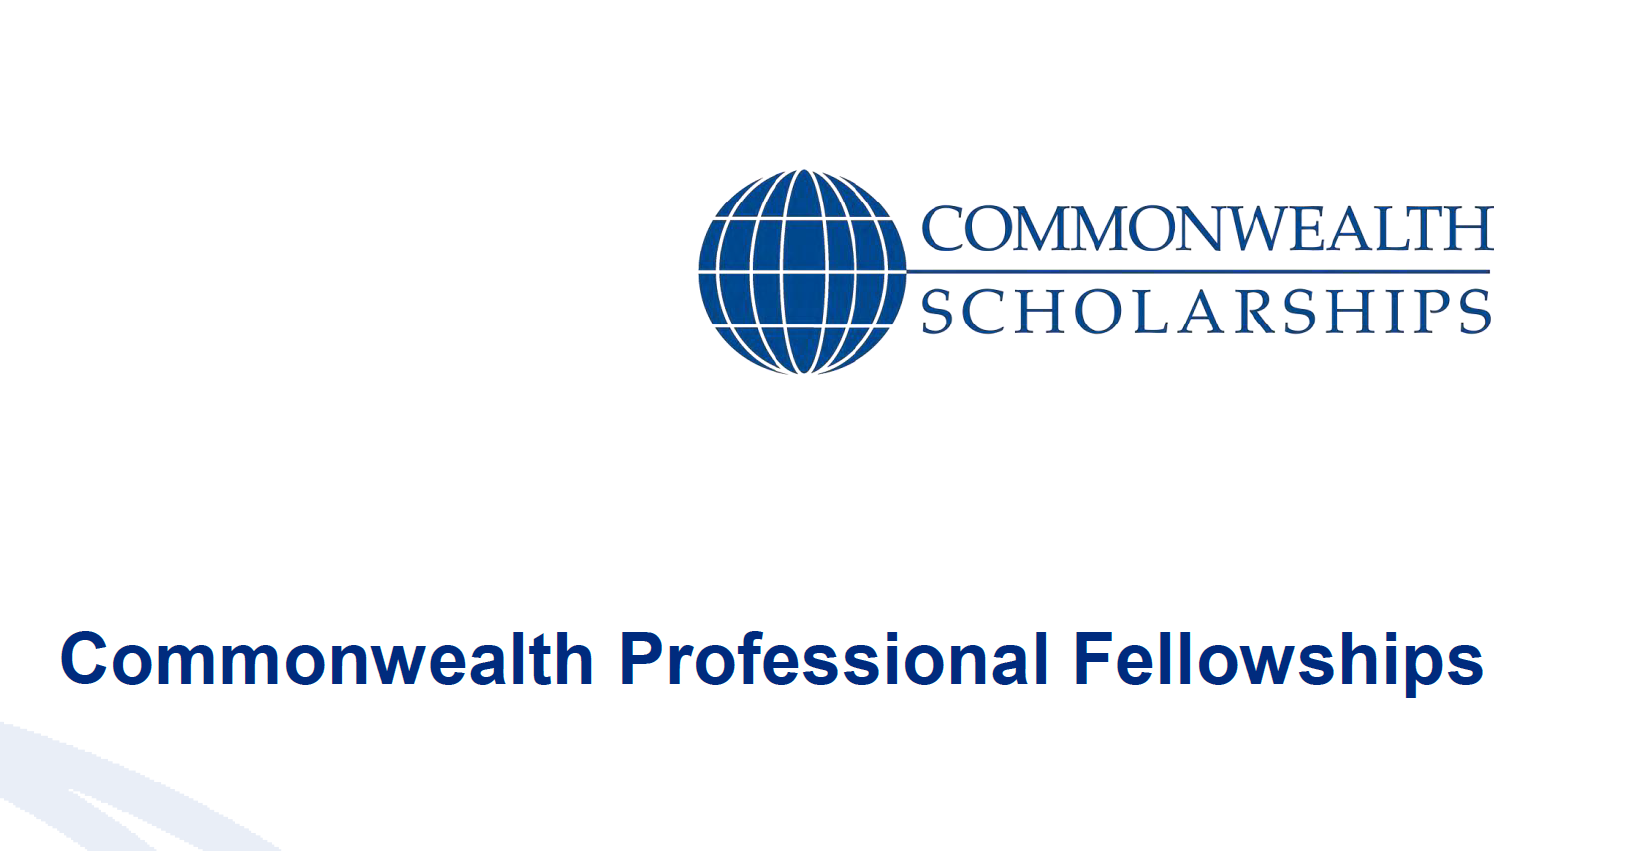 Commonwealth Professional Fellowships 2021/2022 for Mid-career Professionals (Funded)